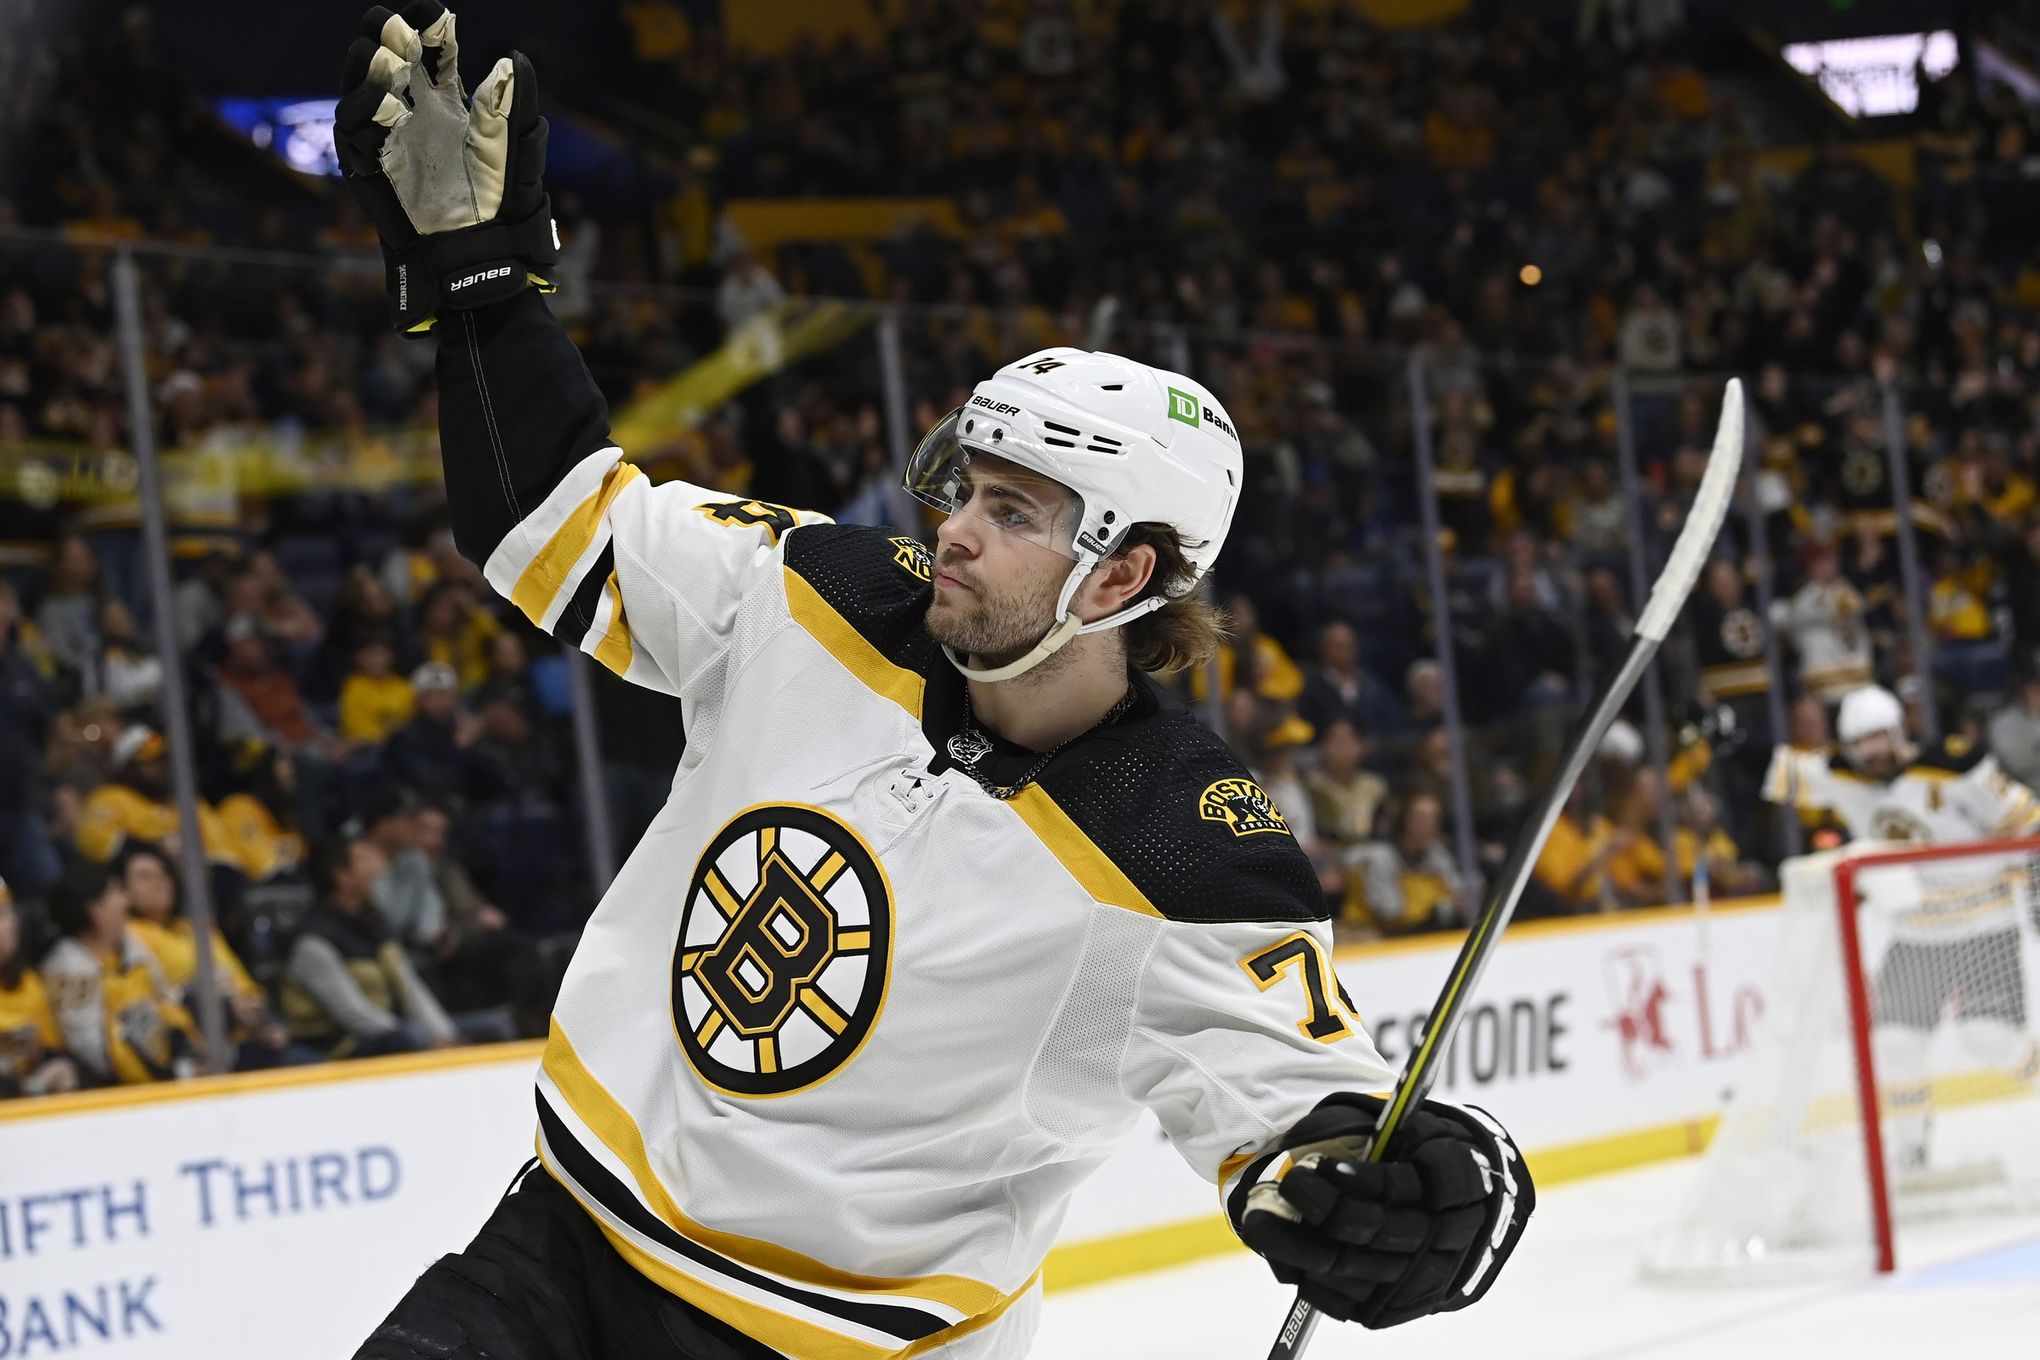 Jake DeBrusk finally offers clarity on his Bruins future